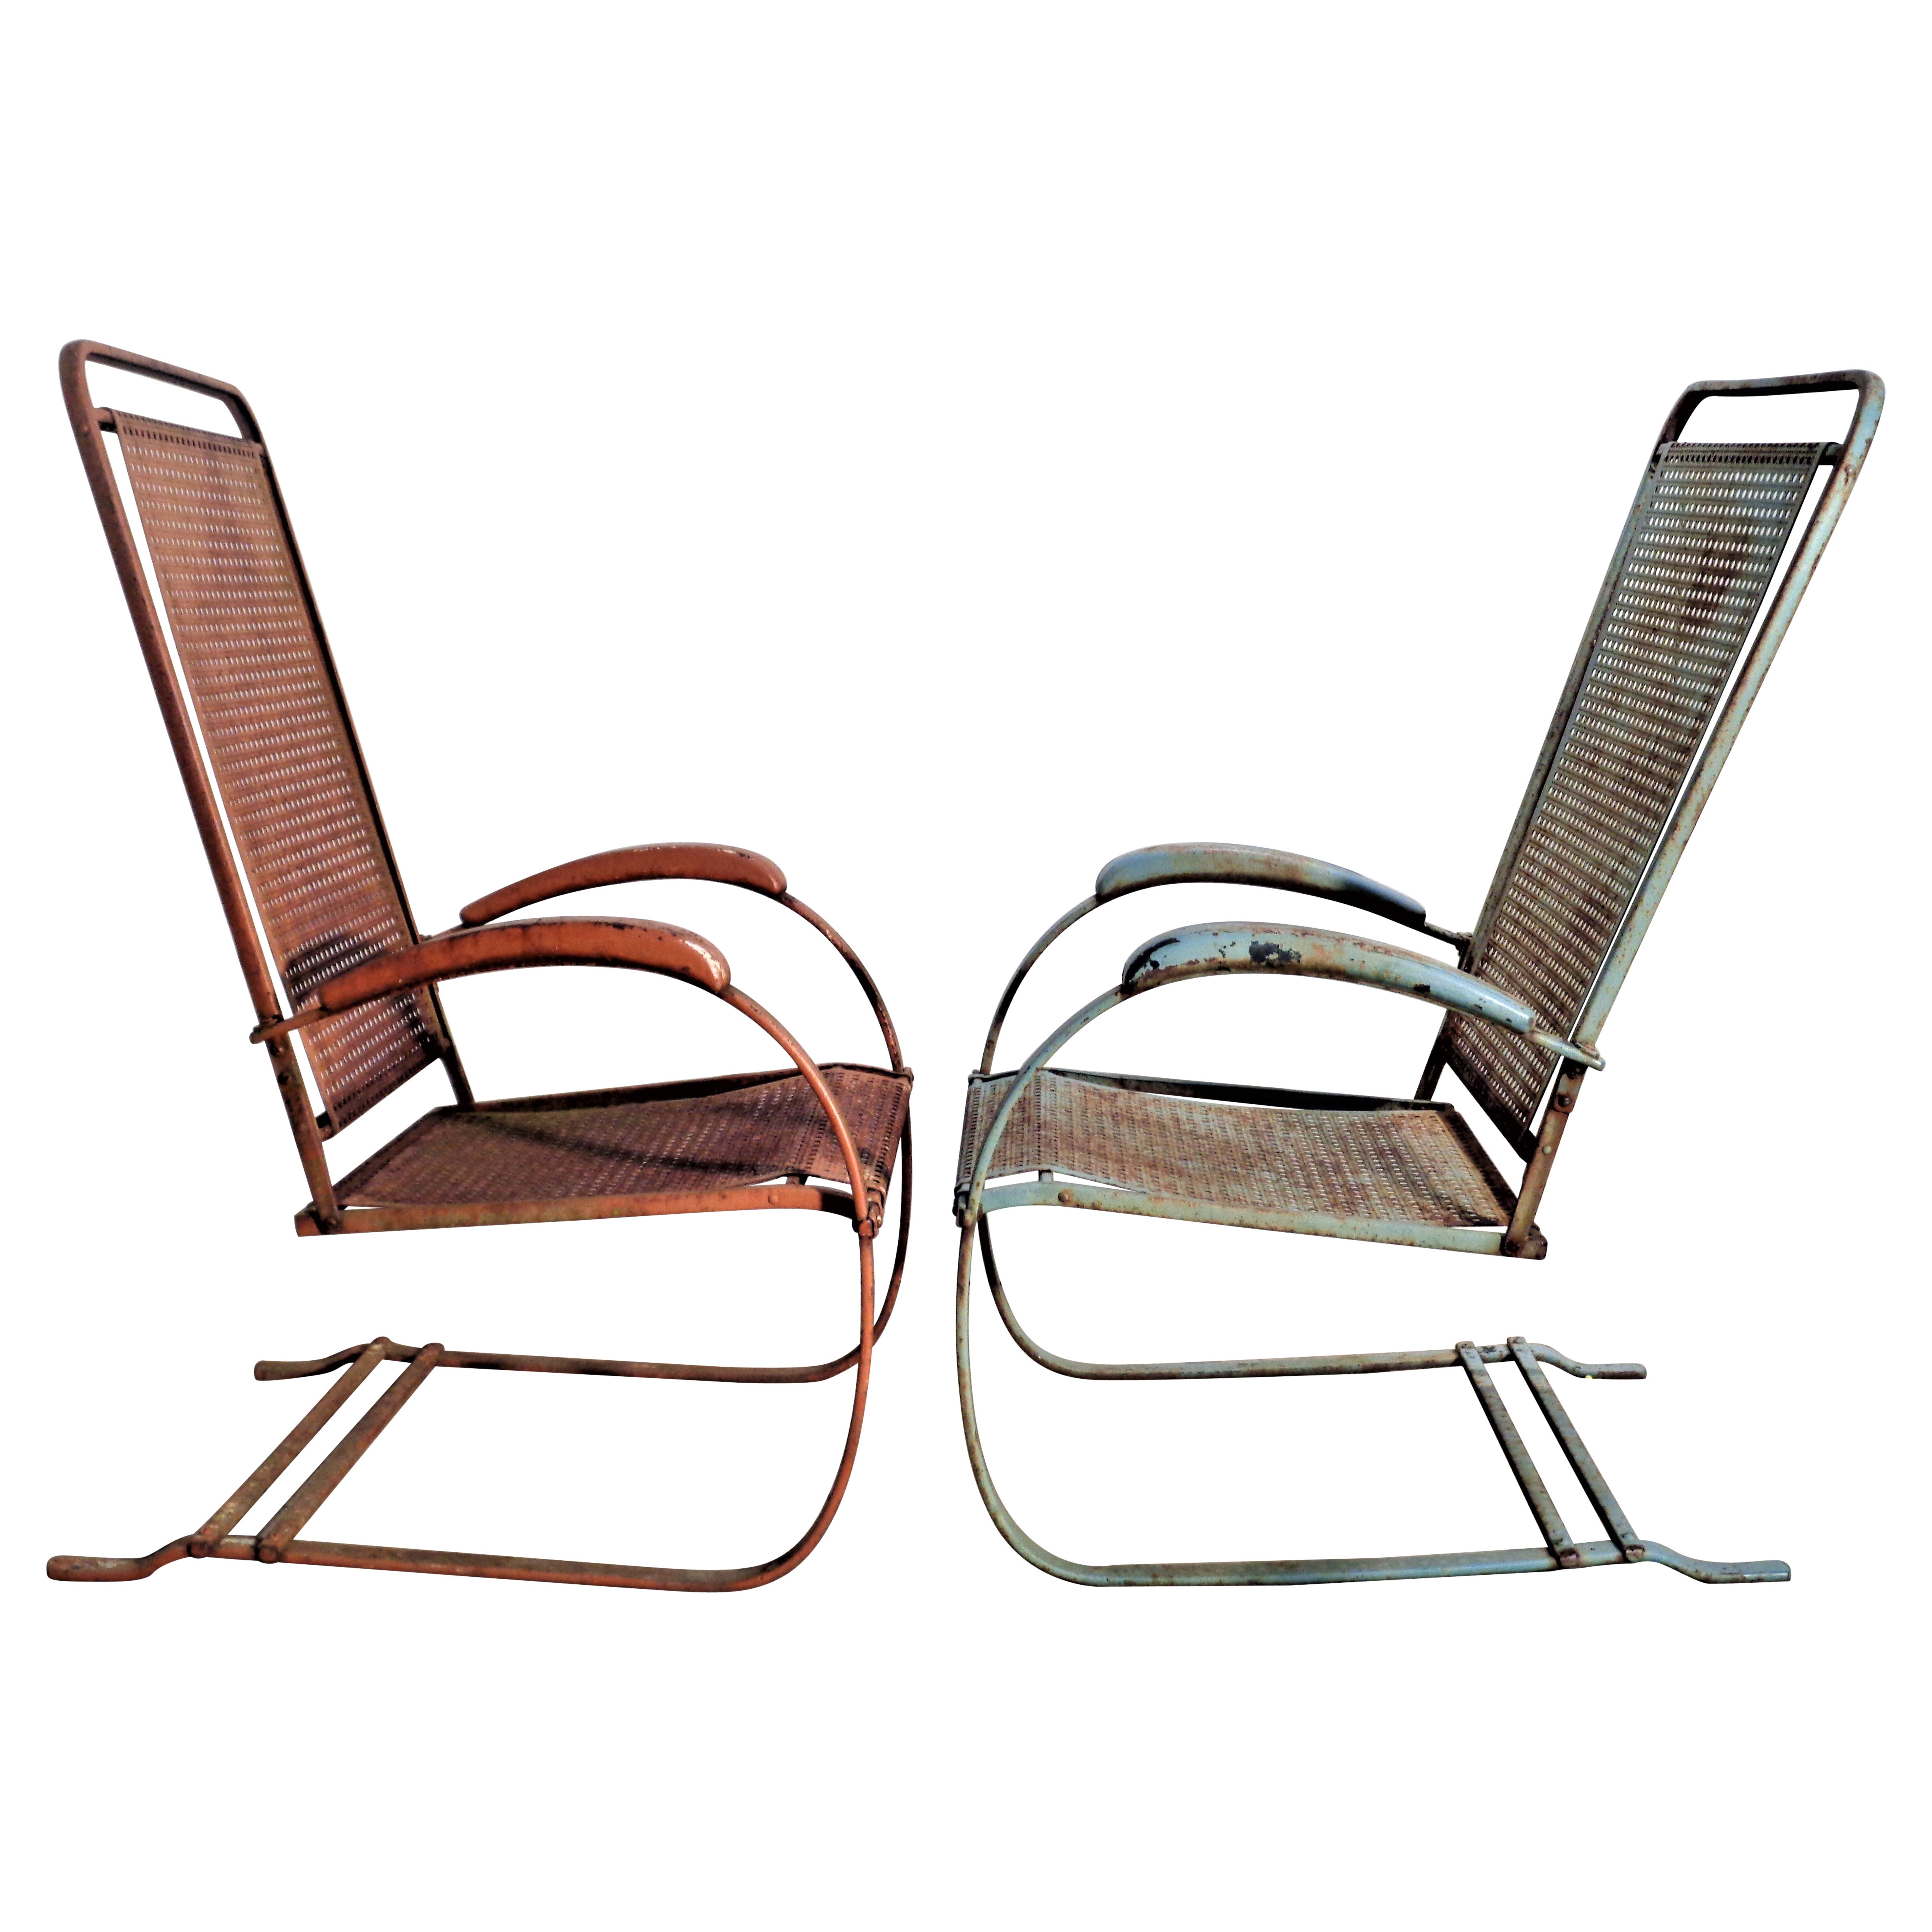   Classic Metal Mesh Spring Steel Cantilever Bounce Chairs - Howell Co. 1930's